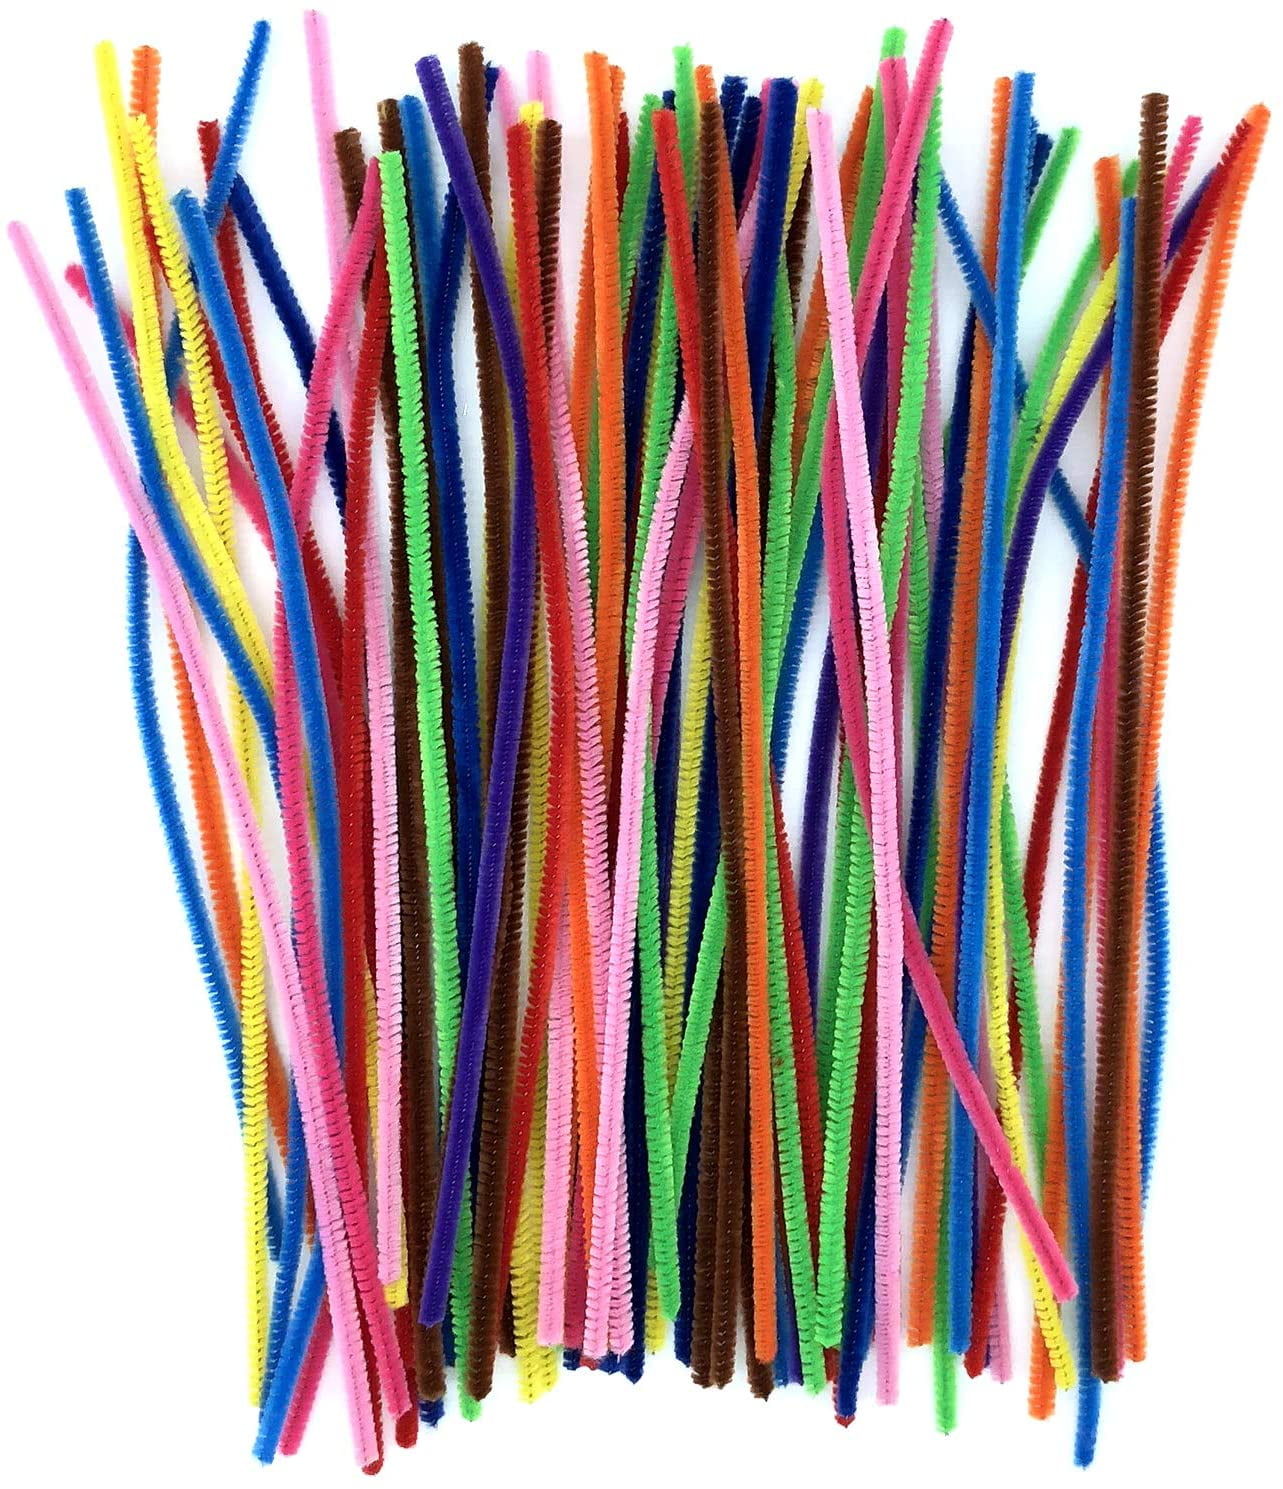 Kids Crafts UNBEATABLE VALUE! 200x Assorted 30cm Chenille Pipe Cleaners LARGE 